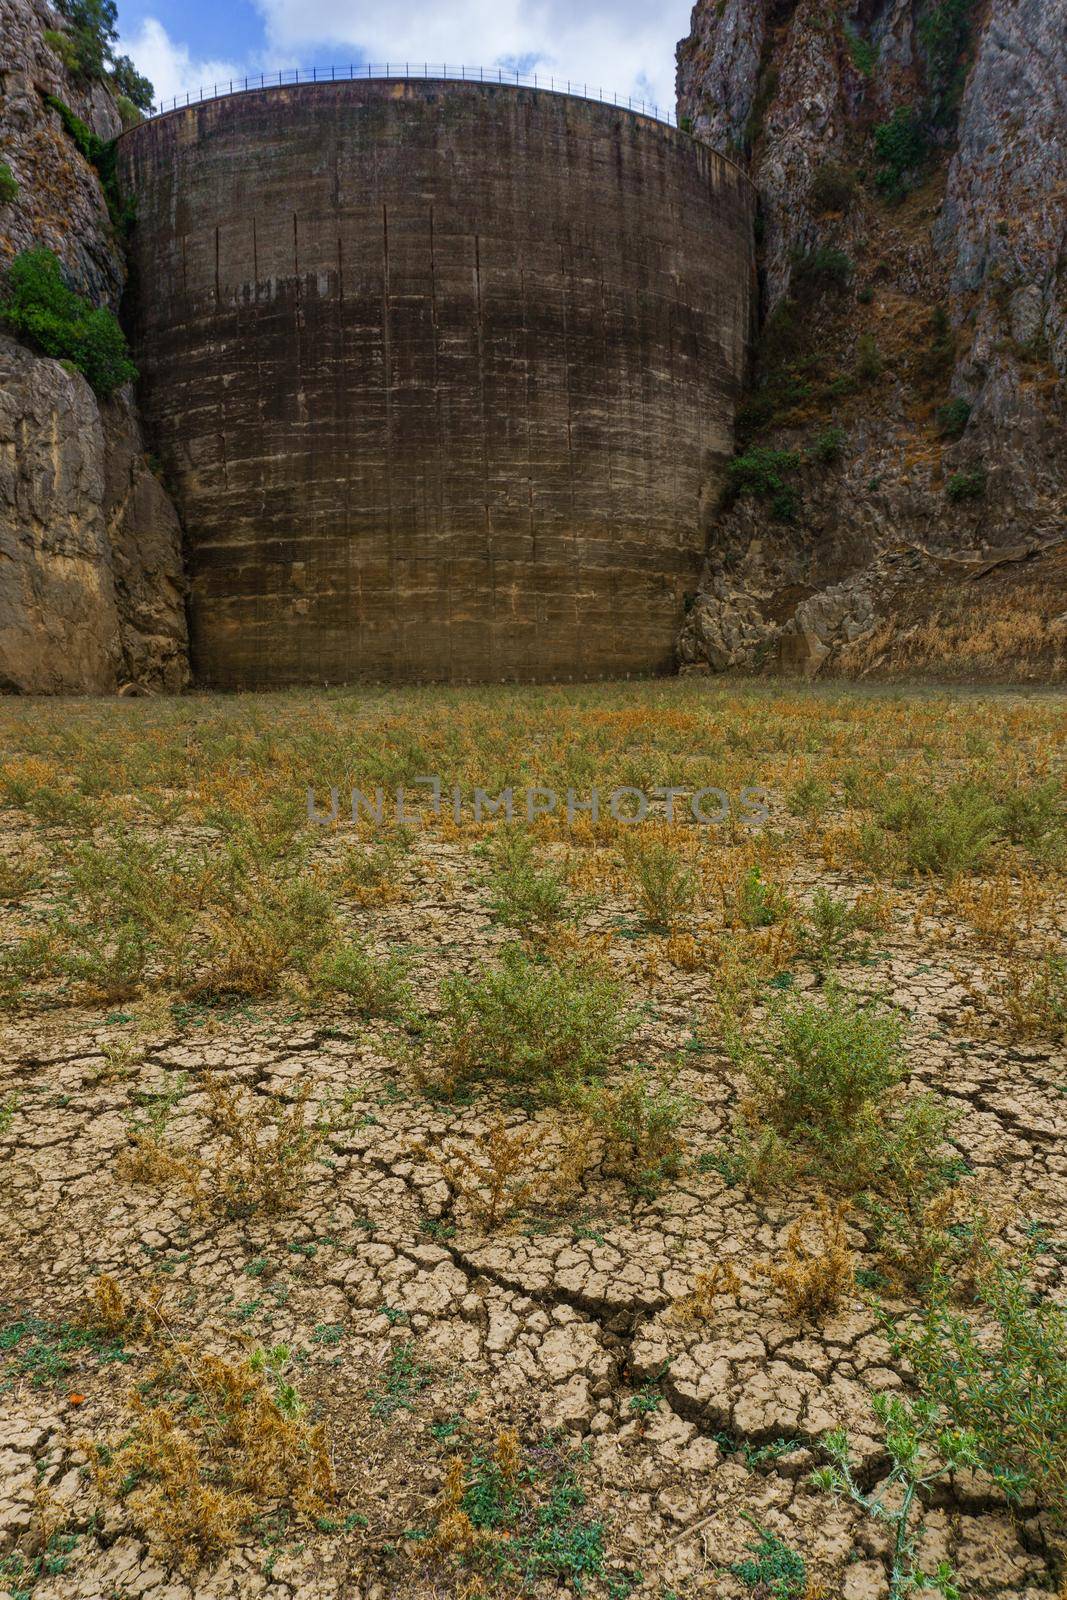 dry swamp bottom with cracked earth, in the background the dam without water due to drought sky with storm clouds